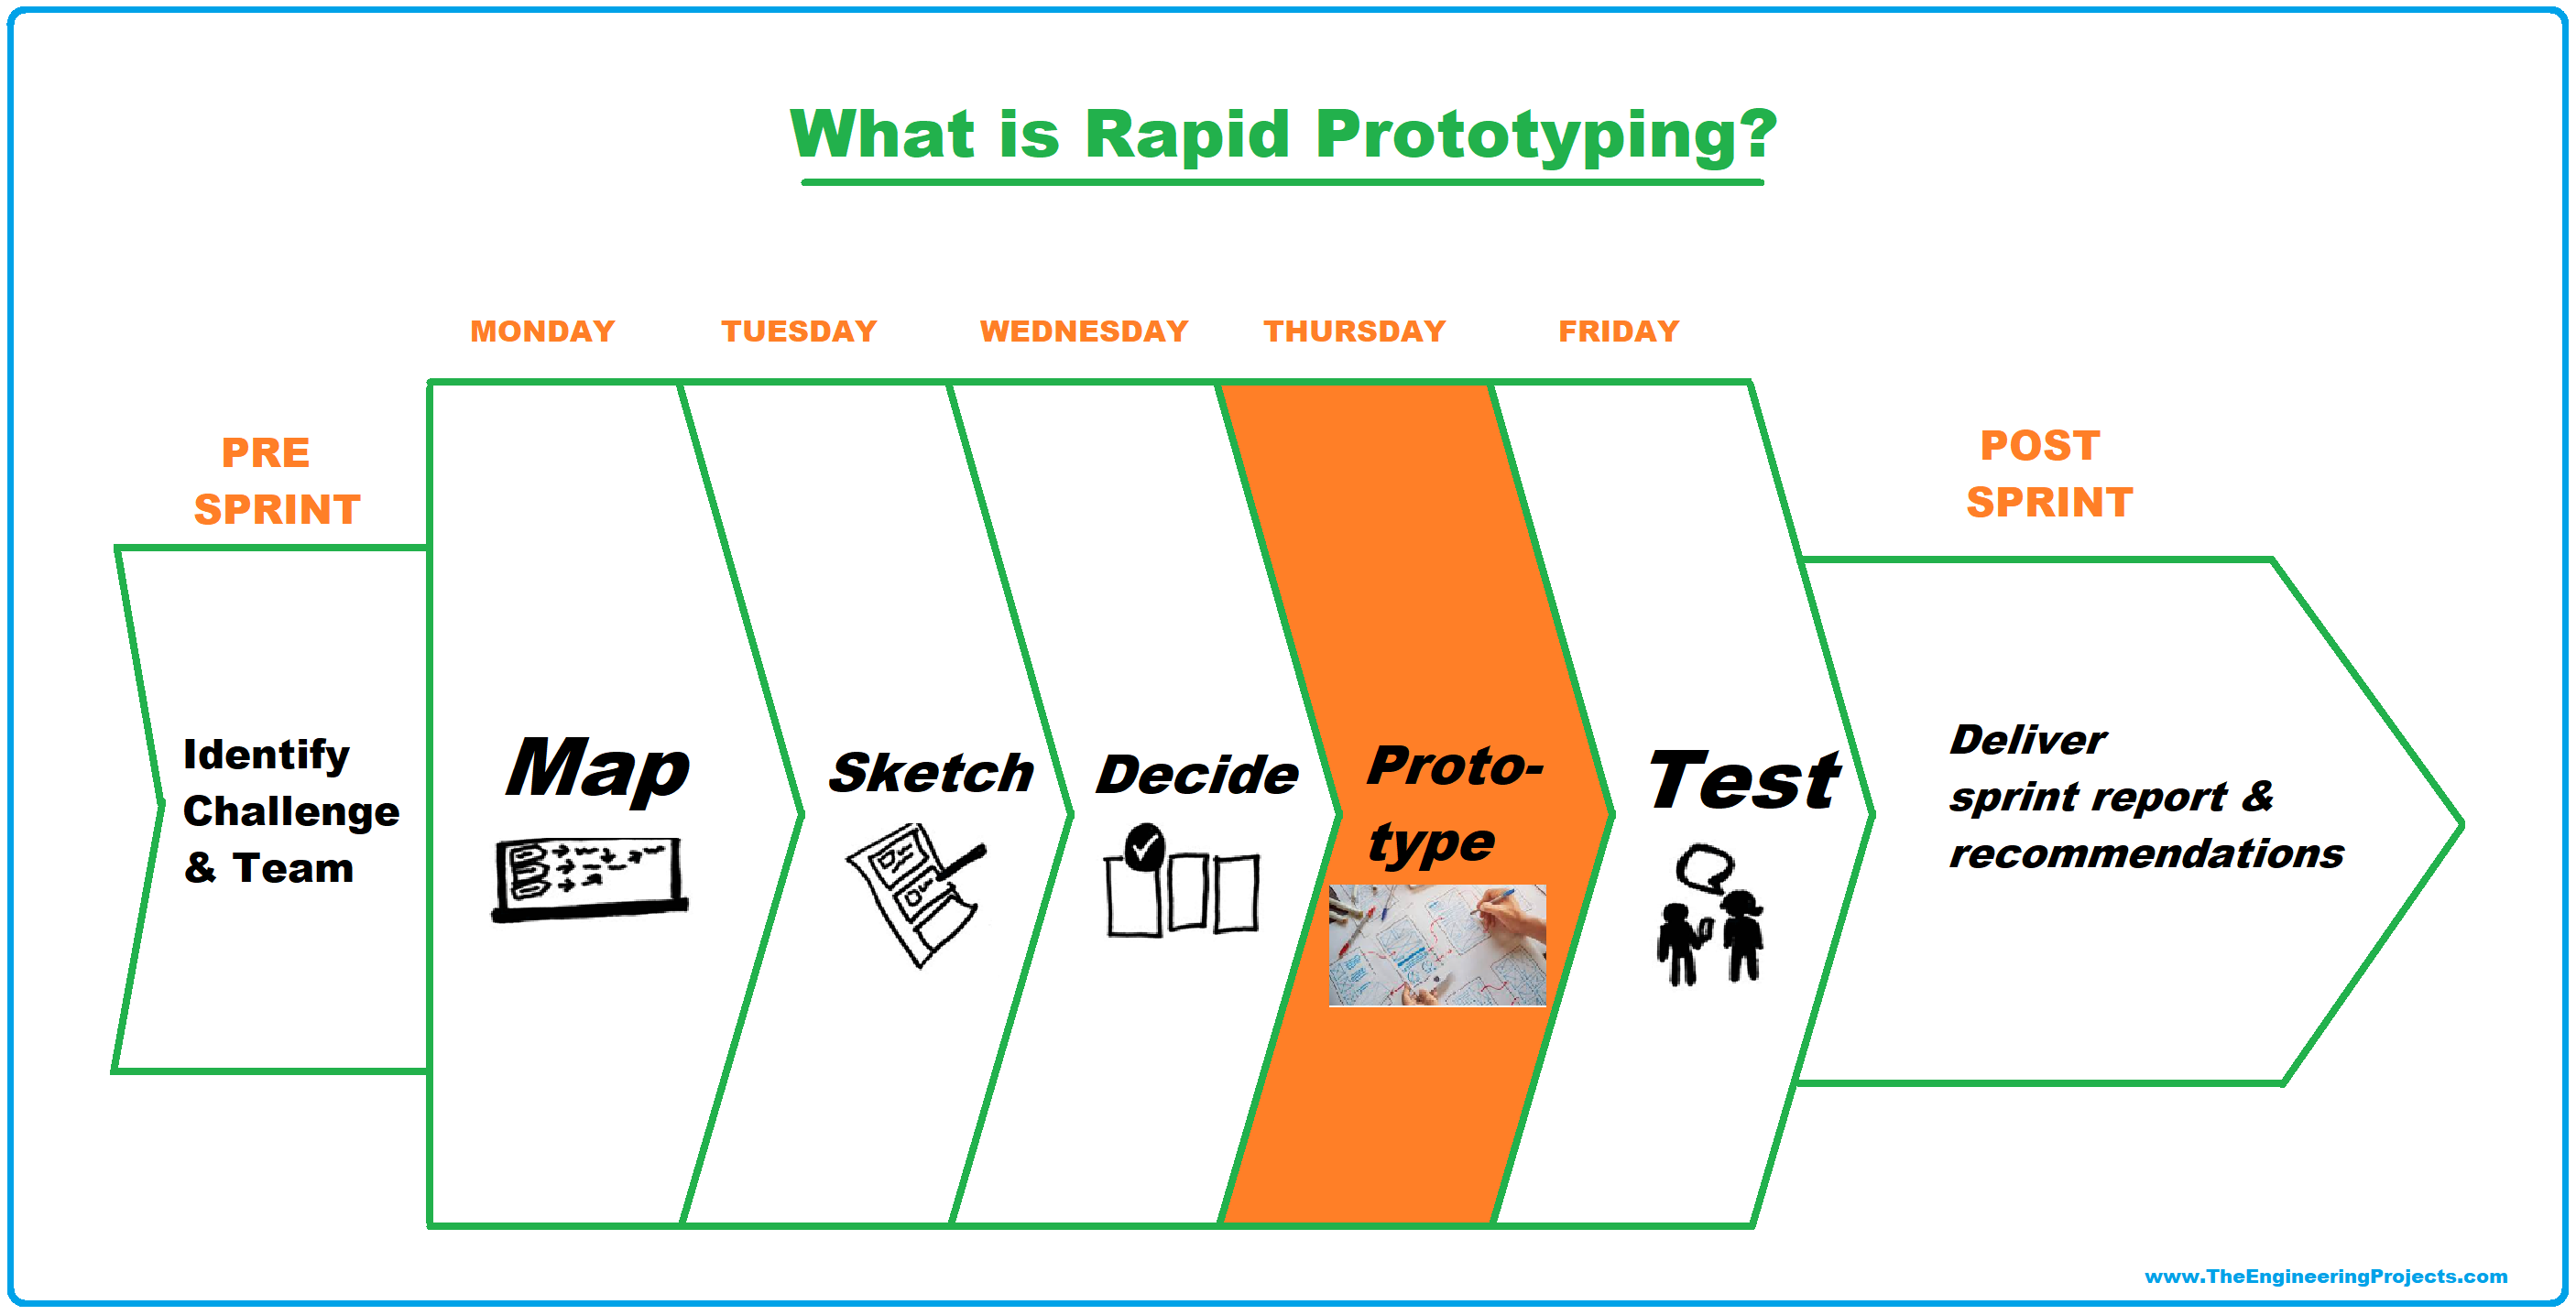  Rapid Prototyping, what is Rapid Prototyping, Rapid Prototype, what is Rapid Prototype, What is a Prototyping, Rapid prototyping steps, rapid prototyping process, Example of Rapid Prototyping, Applications of Rapid Prototyping